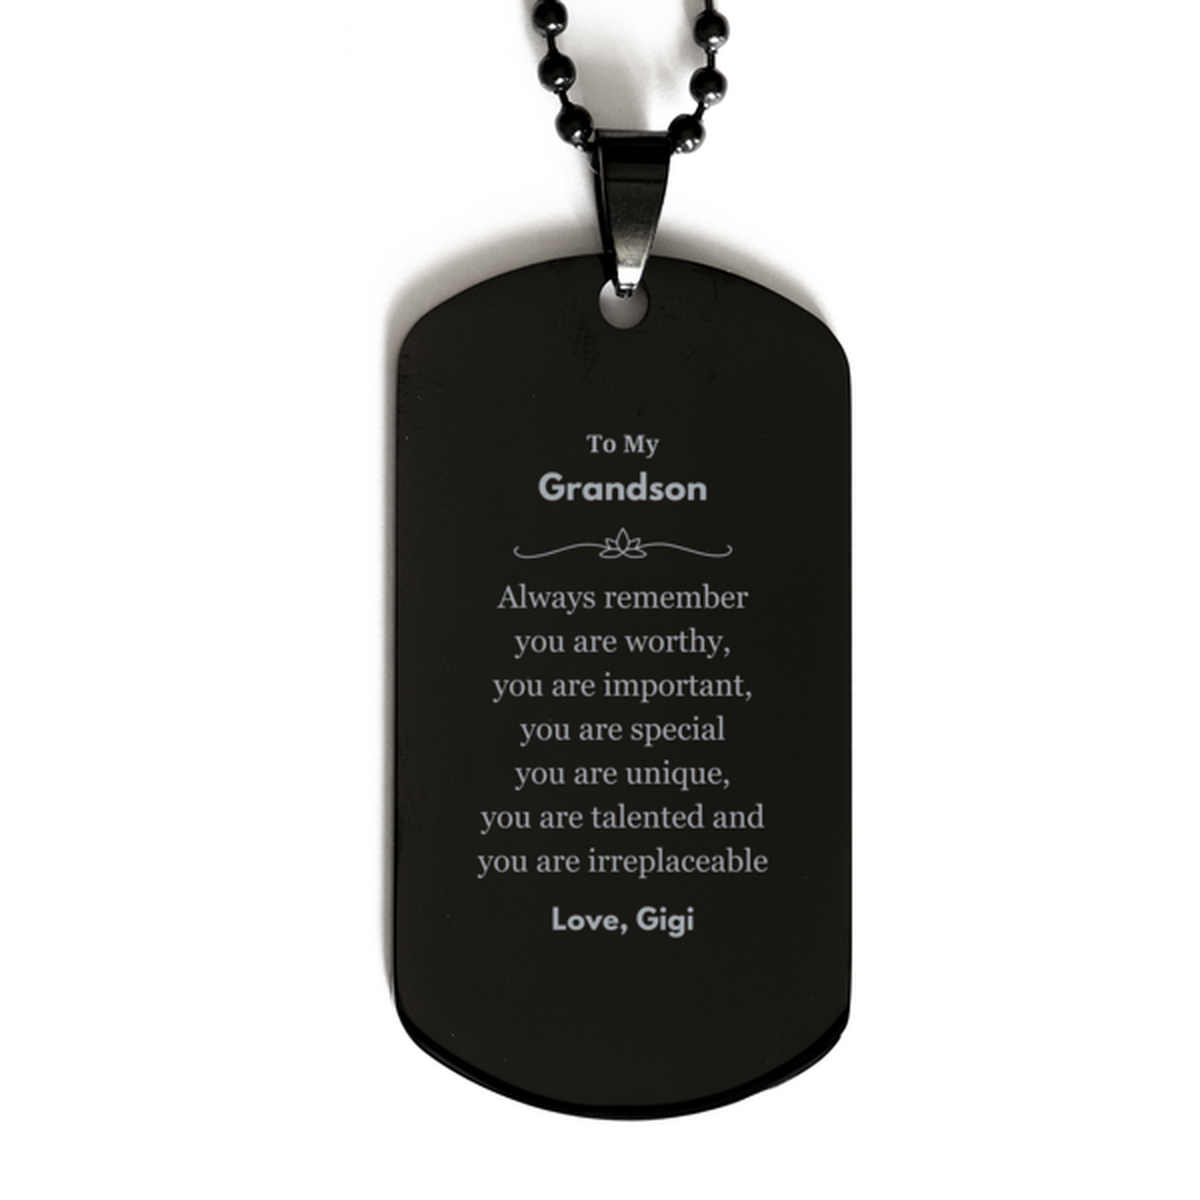 Grandson Birthday Gifts from Gigi, Inspirational Black Dog Tag for Grandson Christmas Graduation Gifts for Grandson Always remember you are worthy, you are important. Love, Gigi